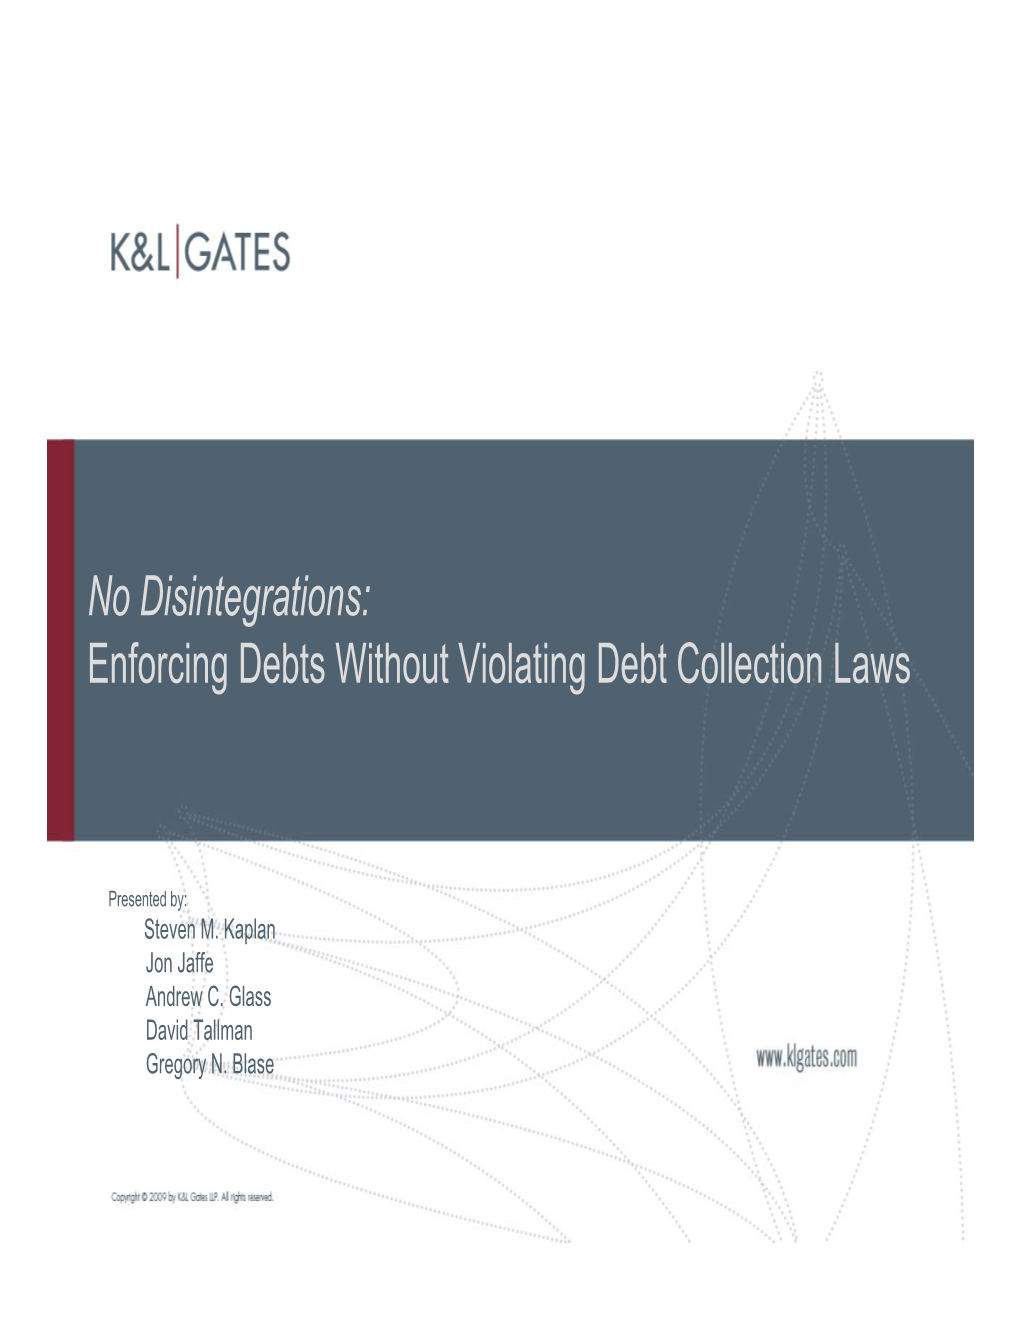 Enforcing Debts Without Violating Debt Collection Laws